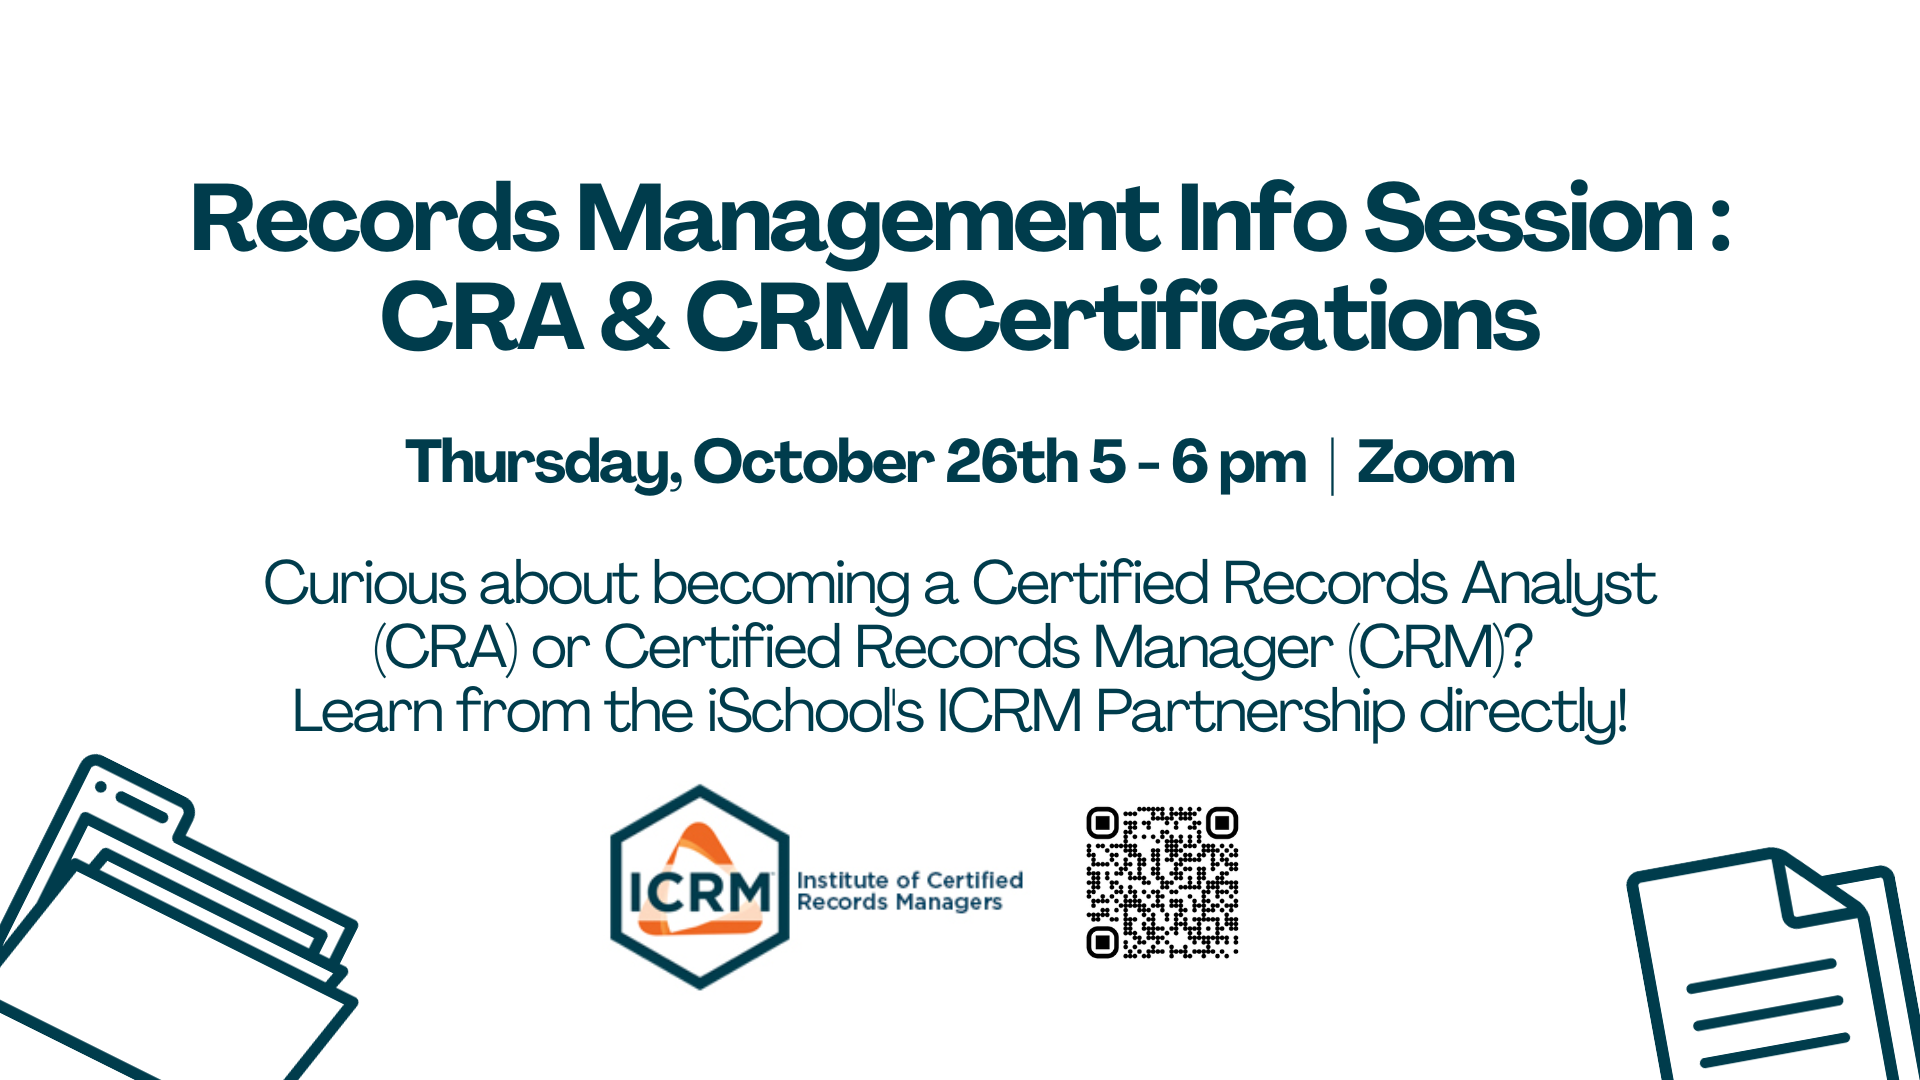 Records Management Info Session